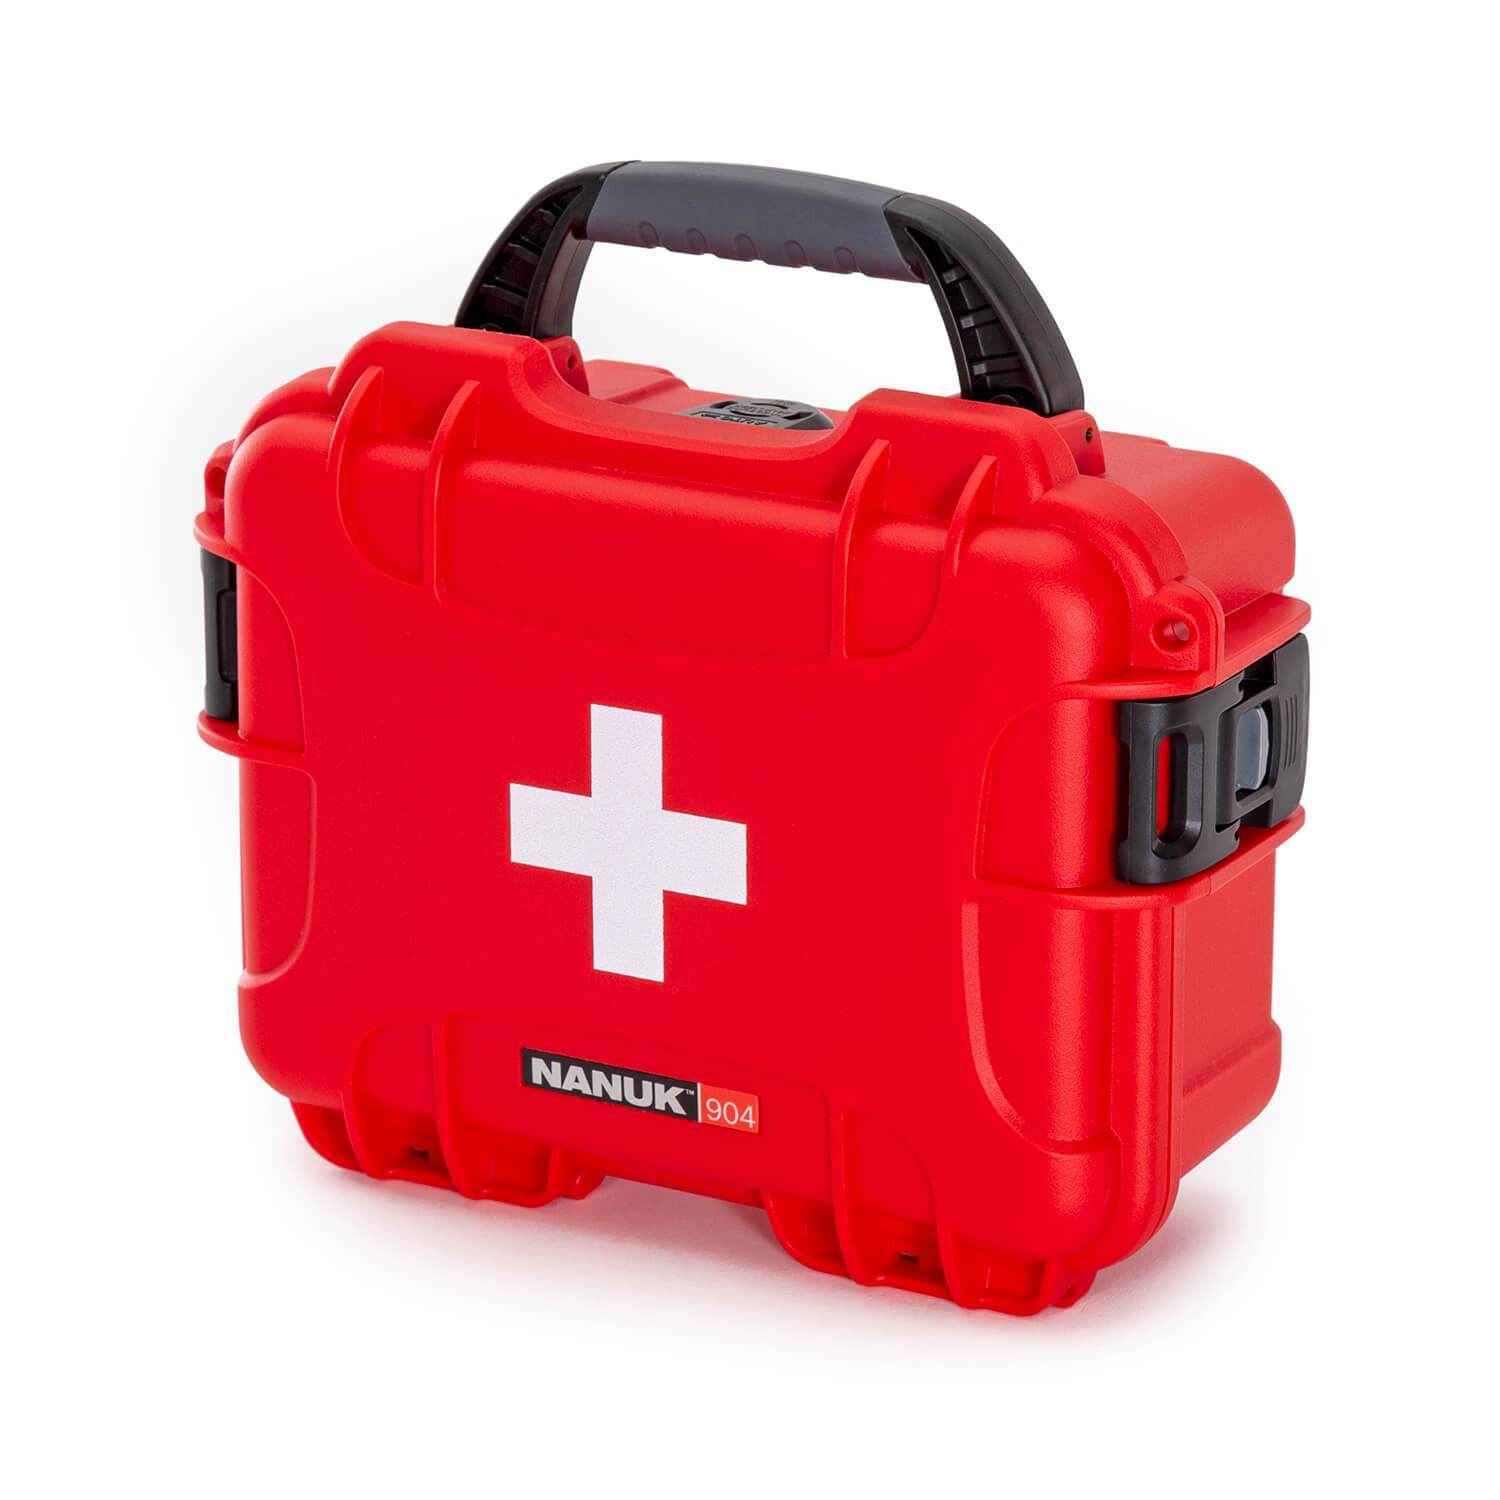 NANUK 904 First Aid case | Waterproof, Dustproof, Indestructible and Lifetime Guaranteed [collection_title]